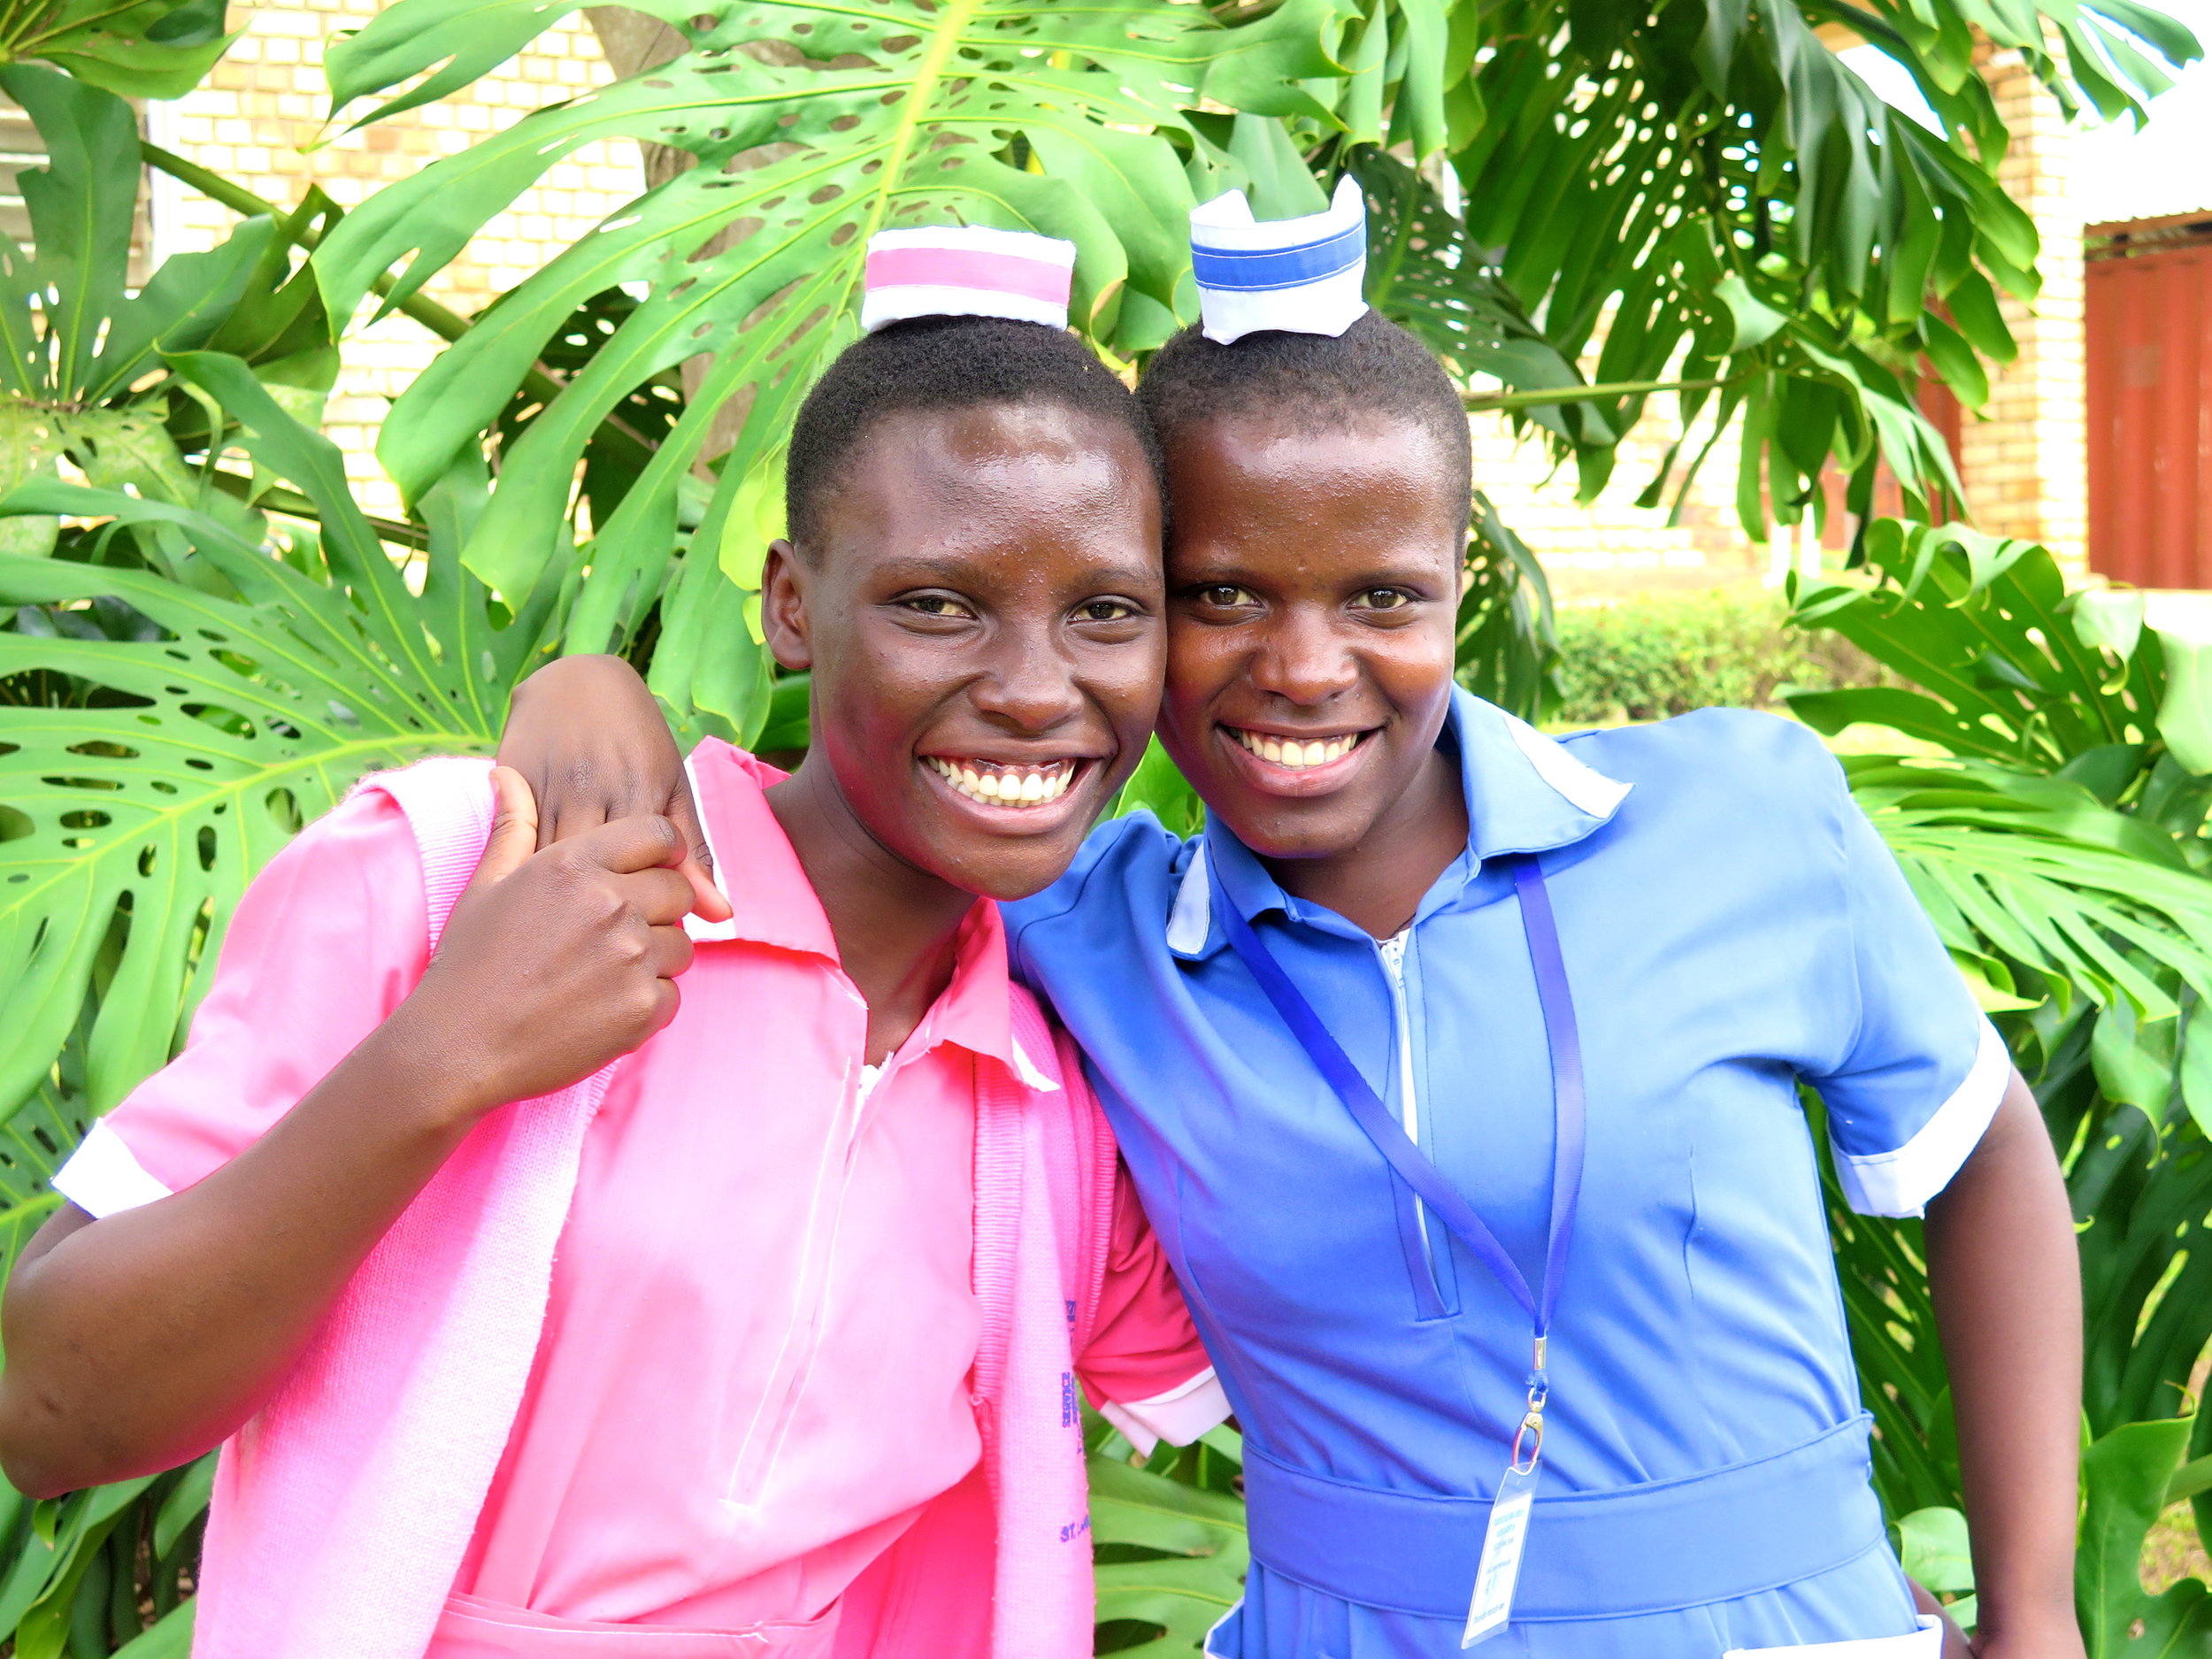  Winnie &amp; Juliet - studying at Villa Maria Nursing School. Winnie hopes to become a nurse and Juliet's dream is to become a midwife. 